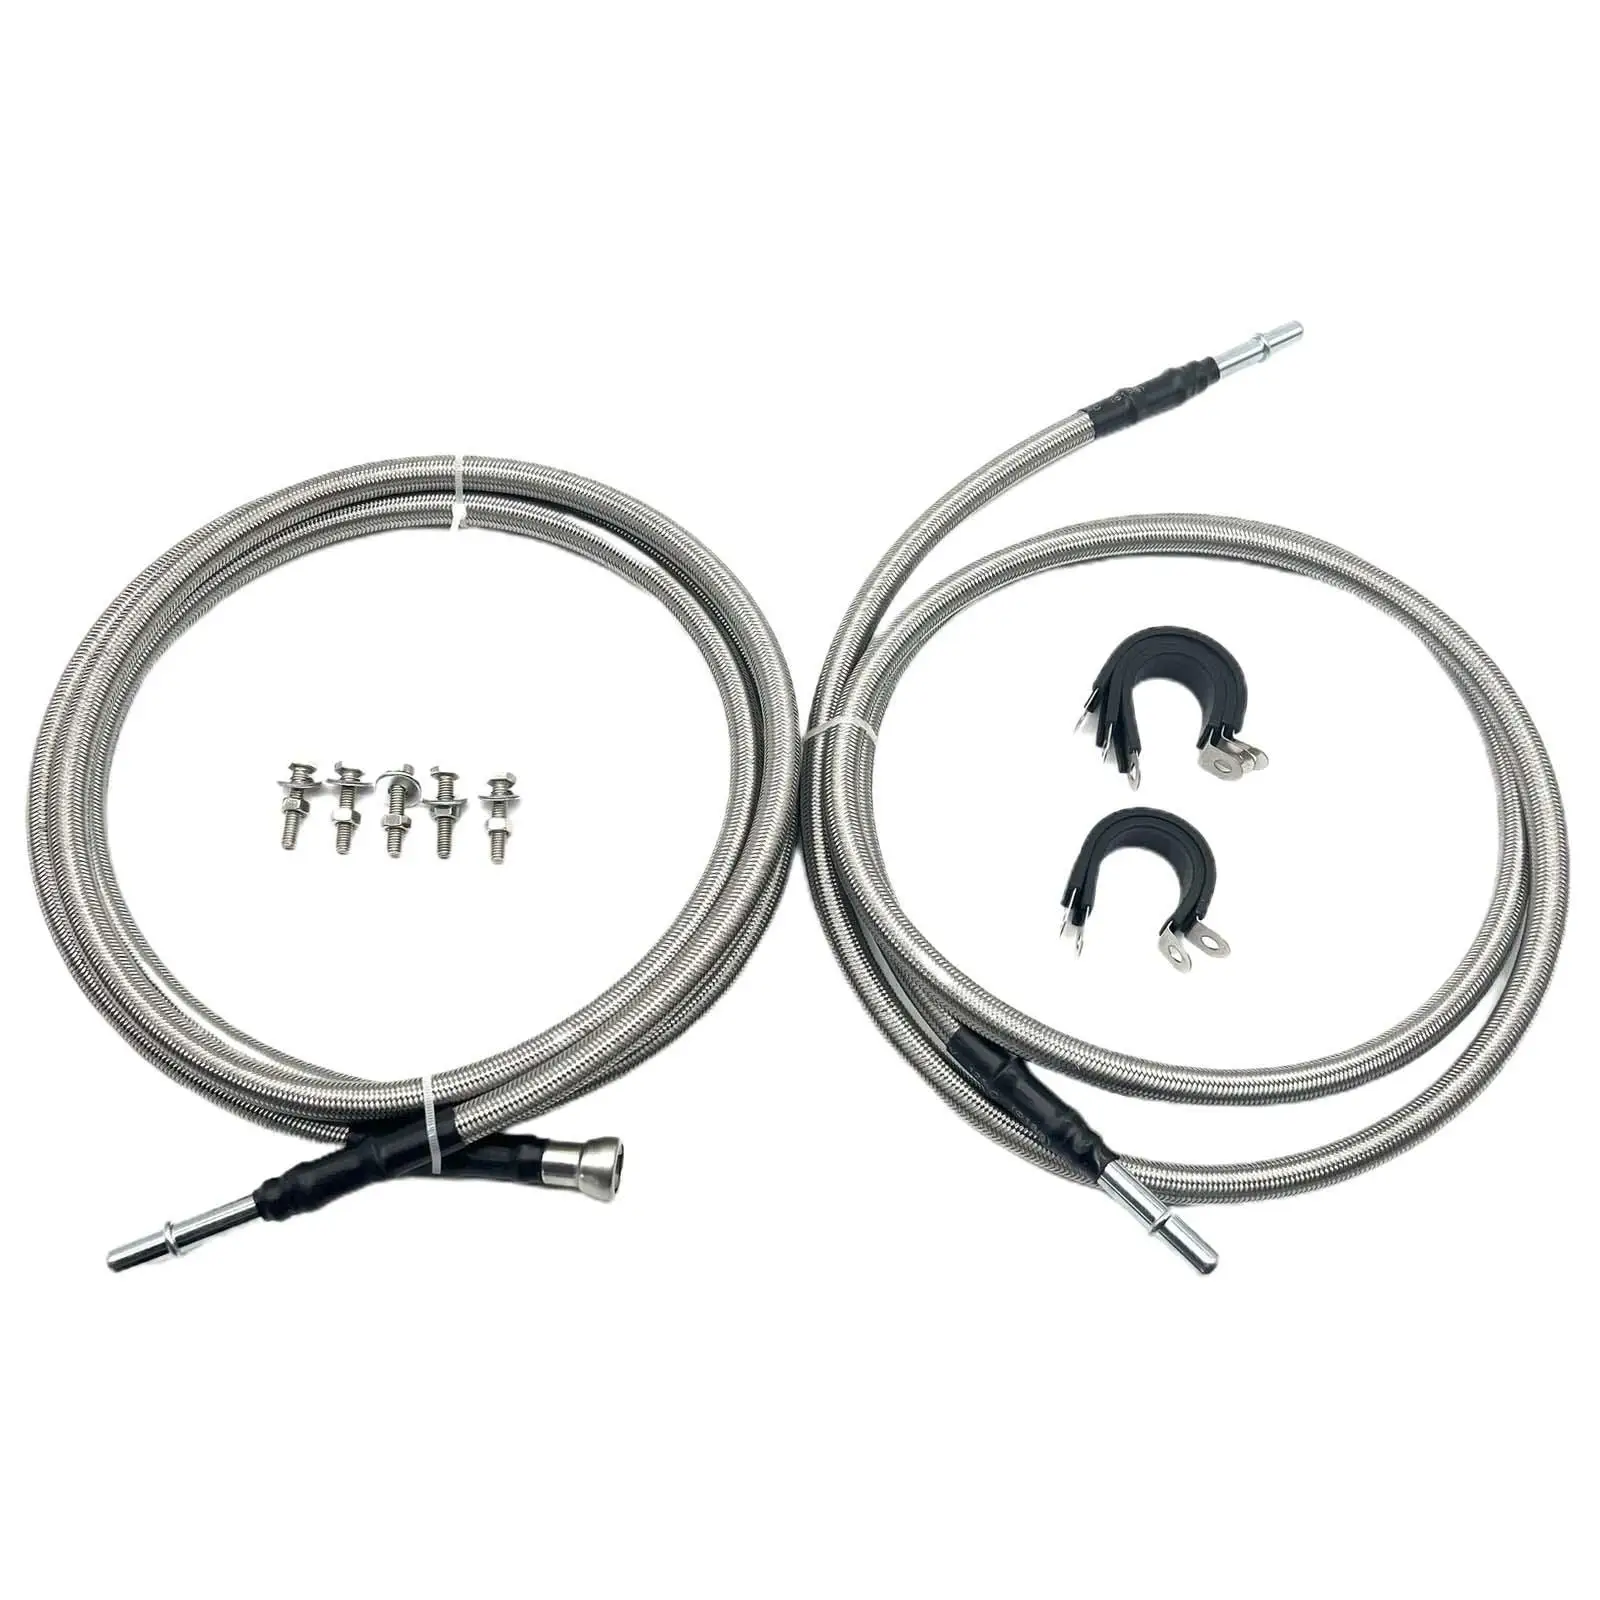 Fuel Line Quick Fix Set Direct Replaces Durable Repair Parts Easy to Install Accessory